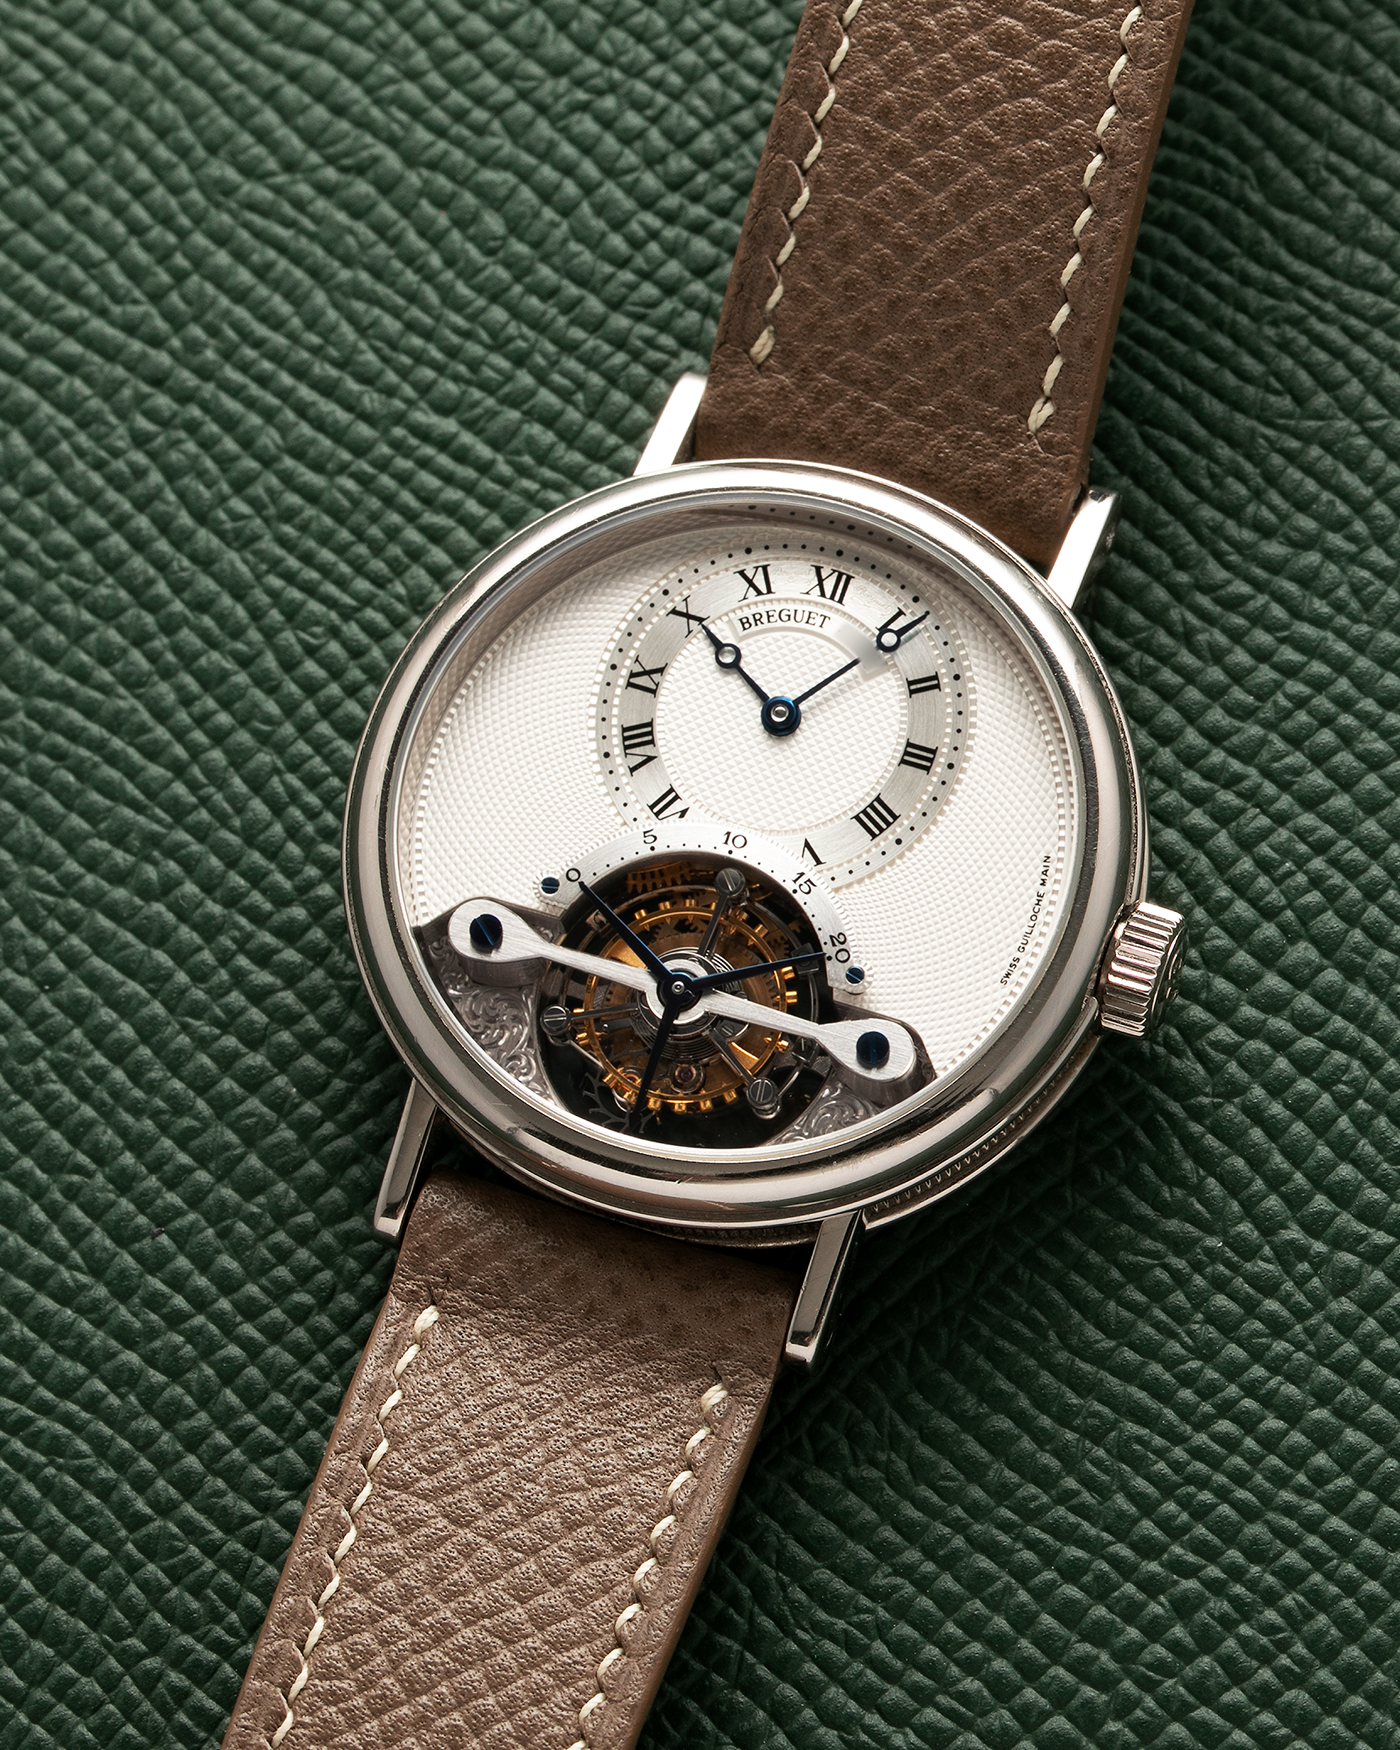 Brand: Breguet Year: 1990’s Model: Classique Tourbillon Reference: 3357 Material: 18-carat White Gold Movement: Breguet Cal. 558, Self-Winding Case Diameter: 36mm Strap: Taupe Calf Grained Strap with Signed 18-carat White Gold Deployant Clasp